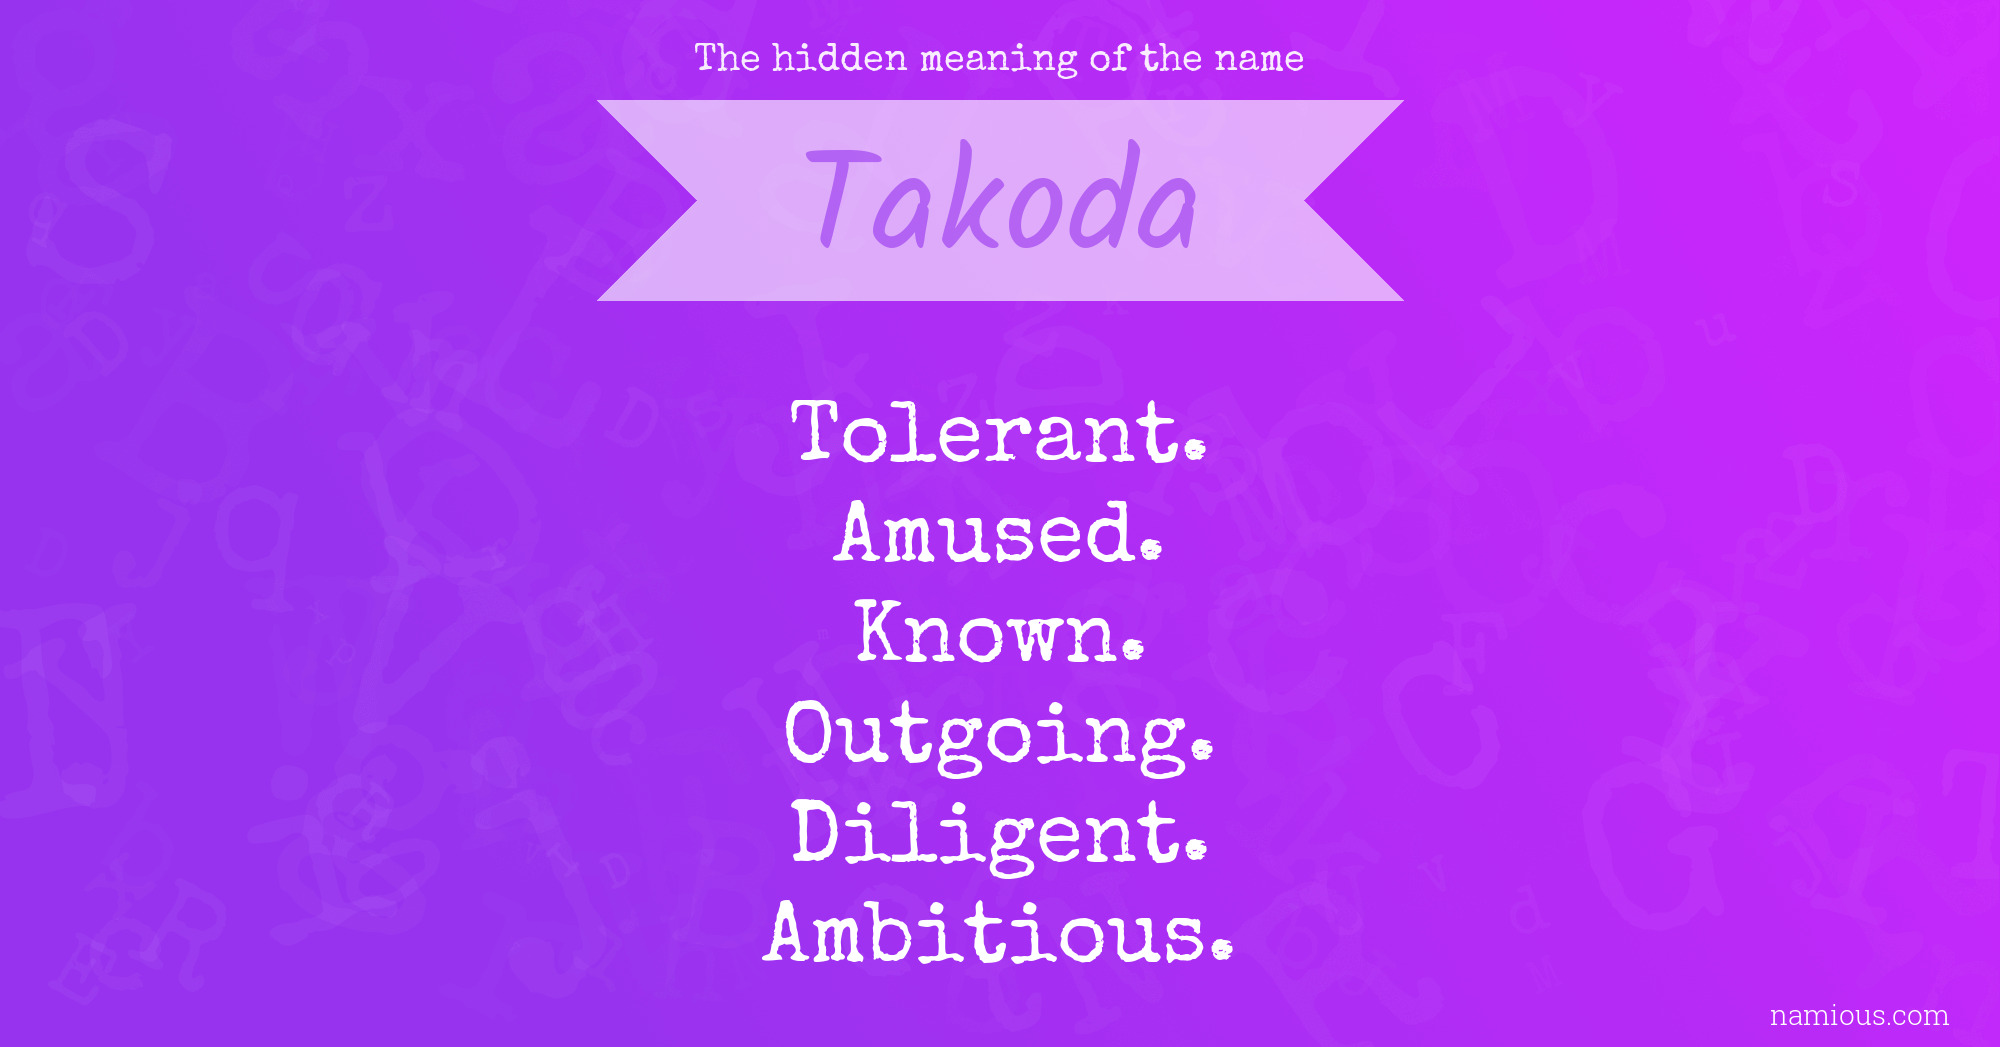 The hidden meaning of the name Takoda